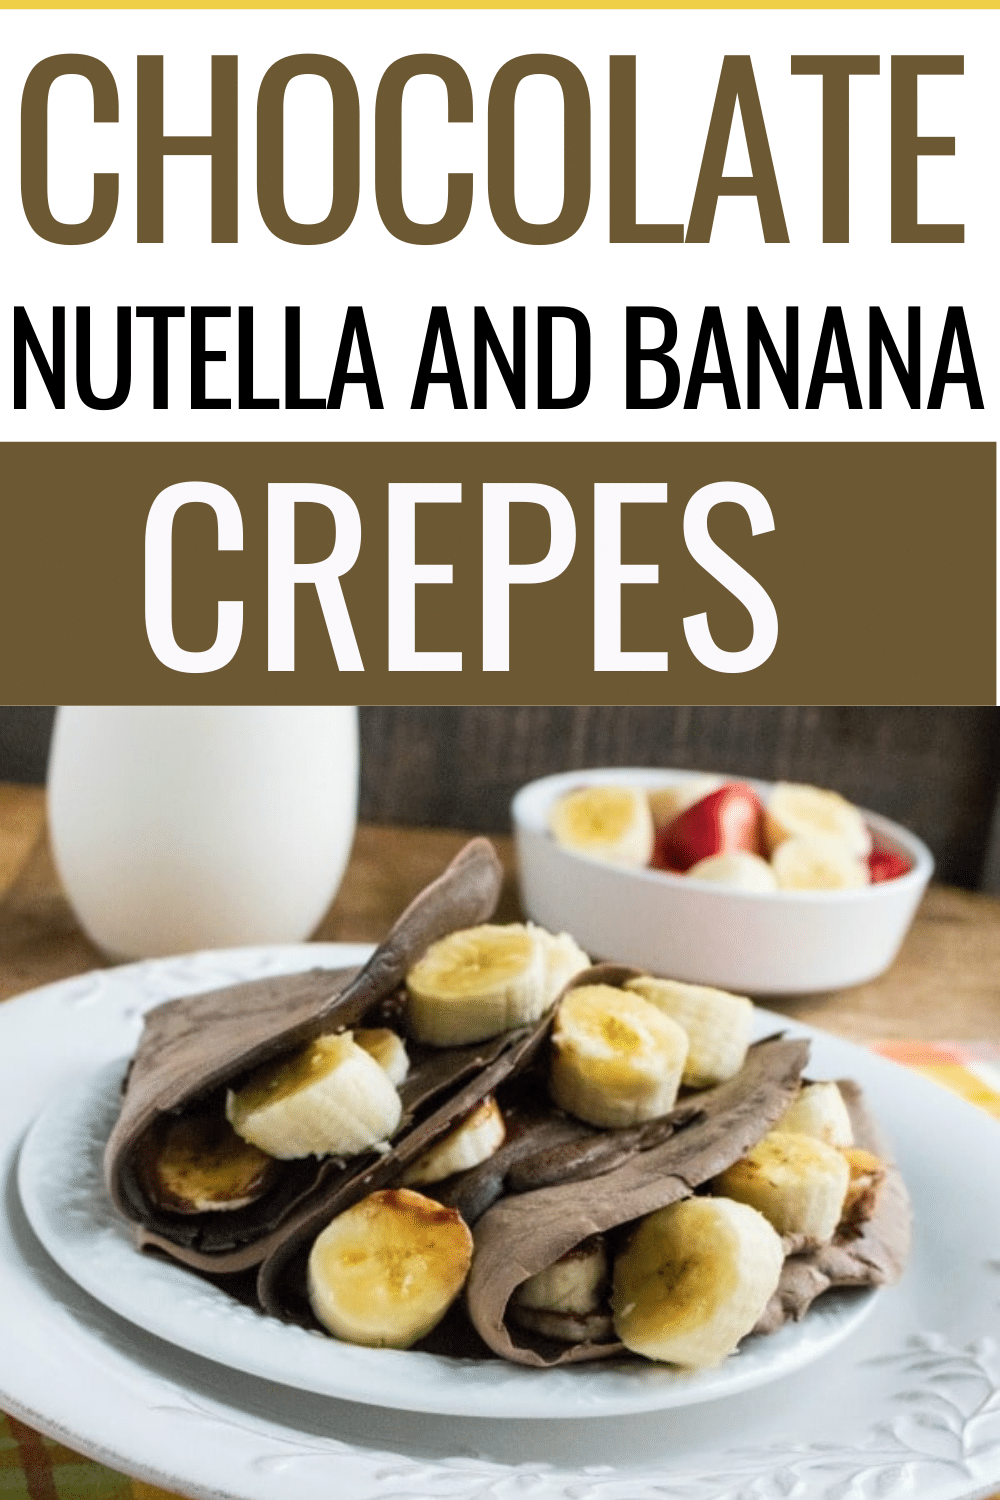 Chocolate Nutella and Banana Crepes are a delicious way to start the day. This decadent breakfast is easy to make and your family will ask for more! #crepes #breakfast #Nutella via @wondermomwannab